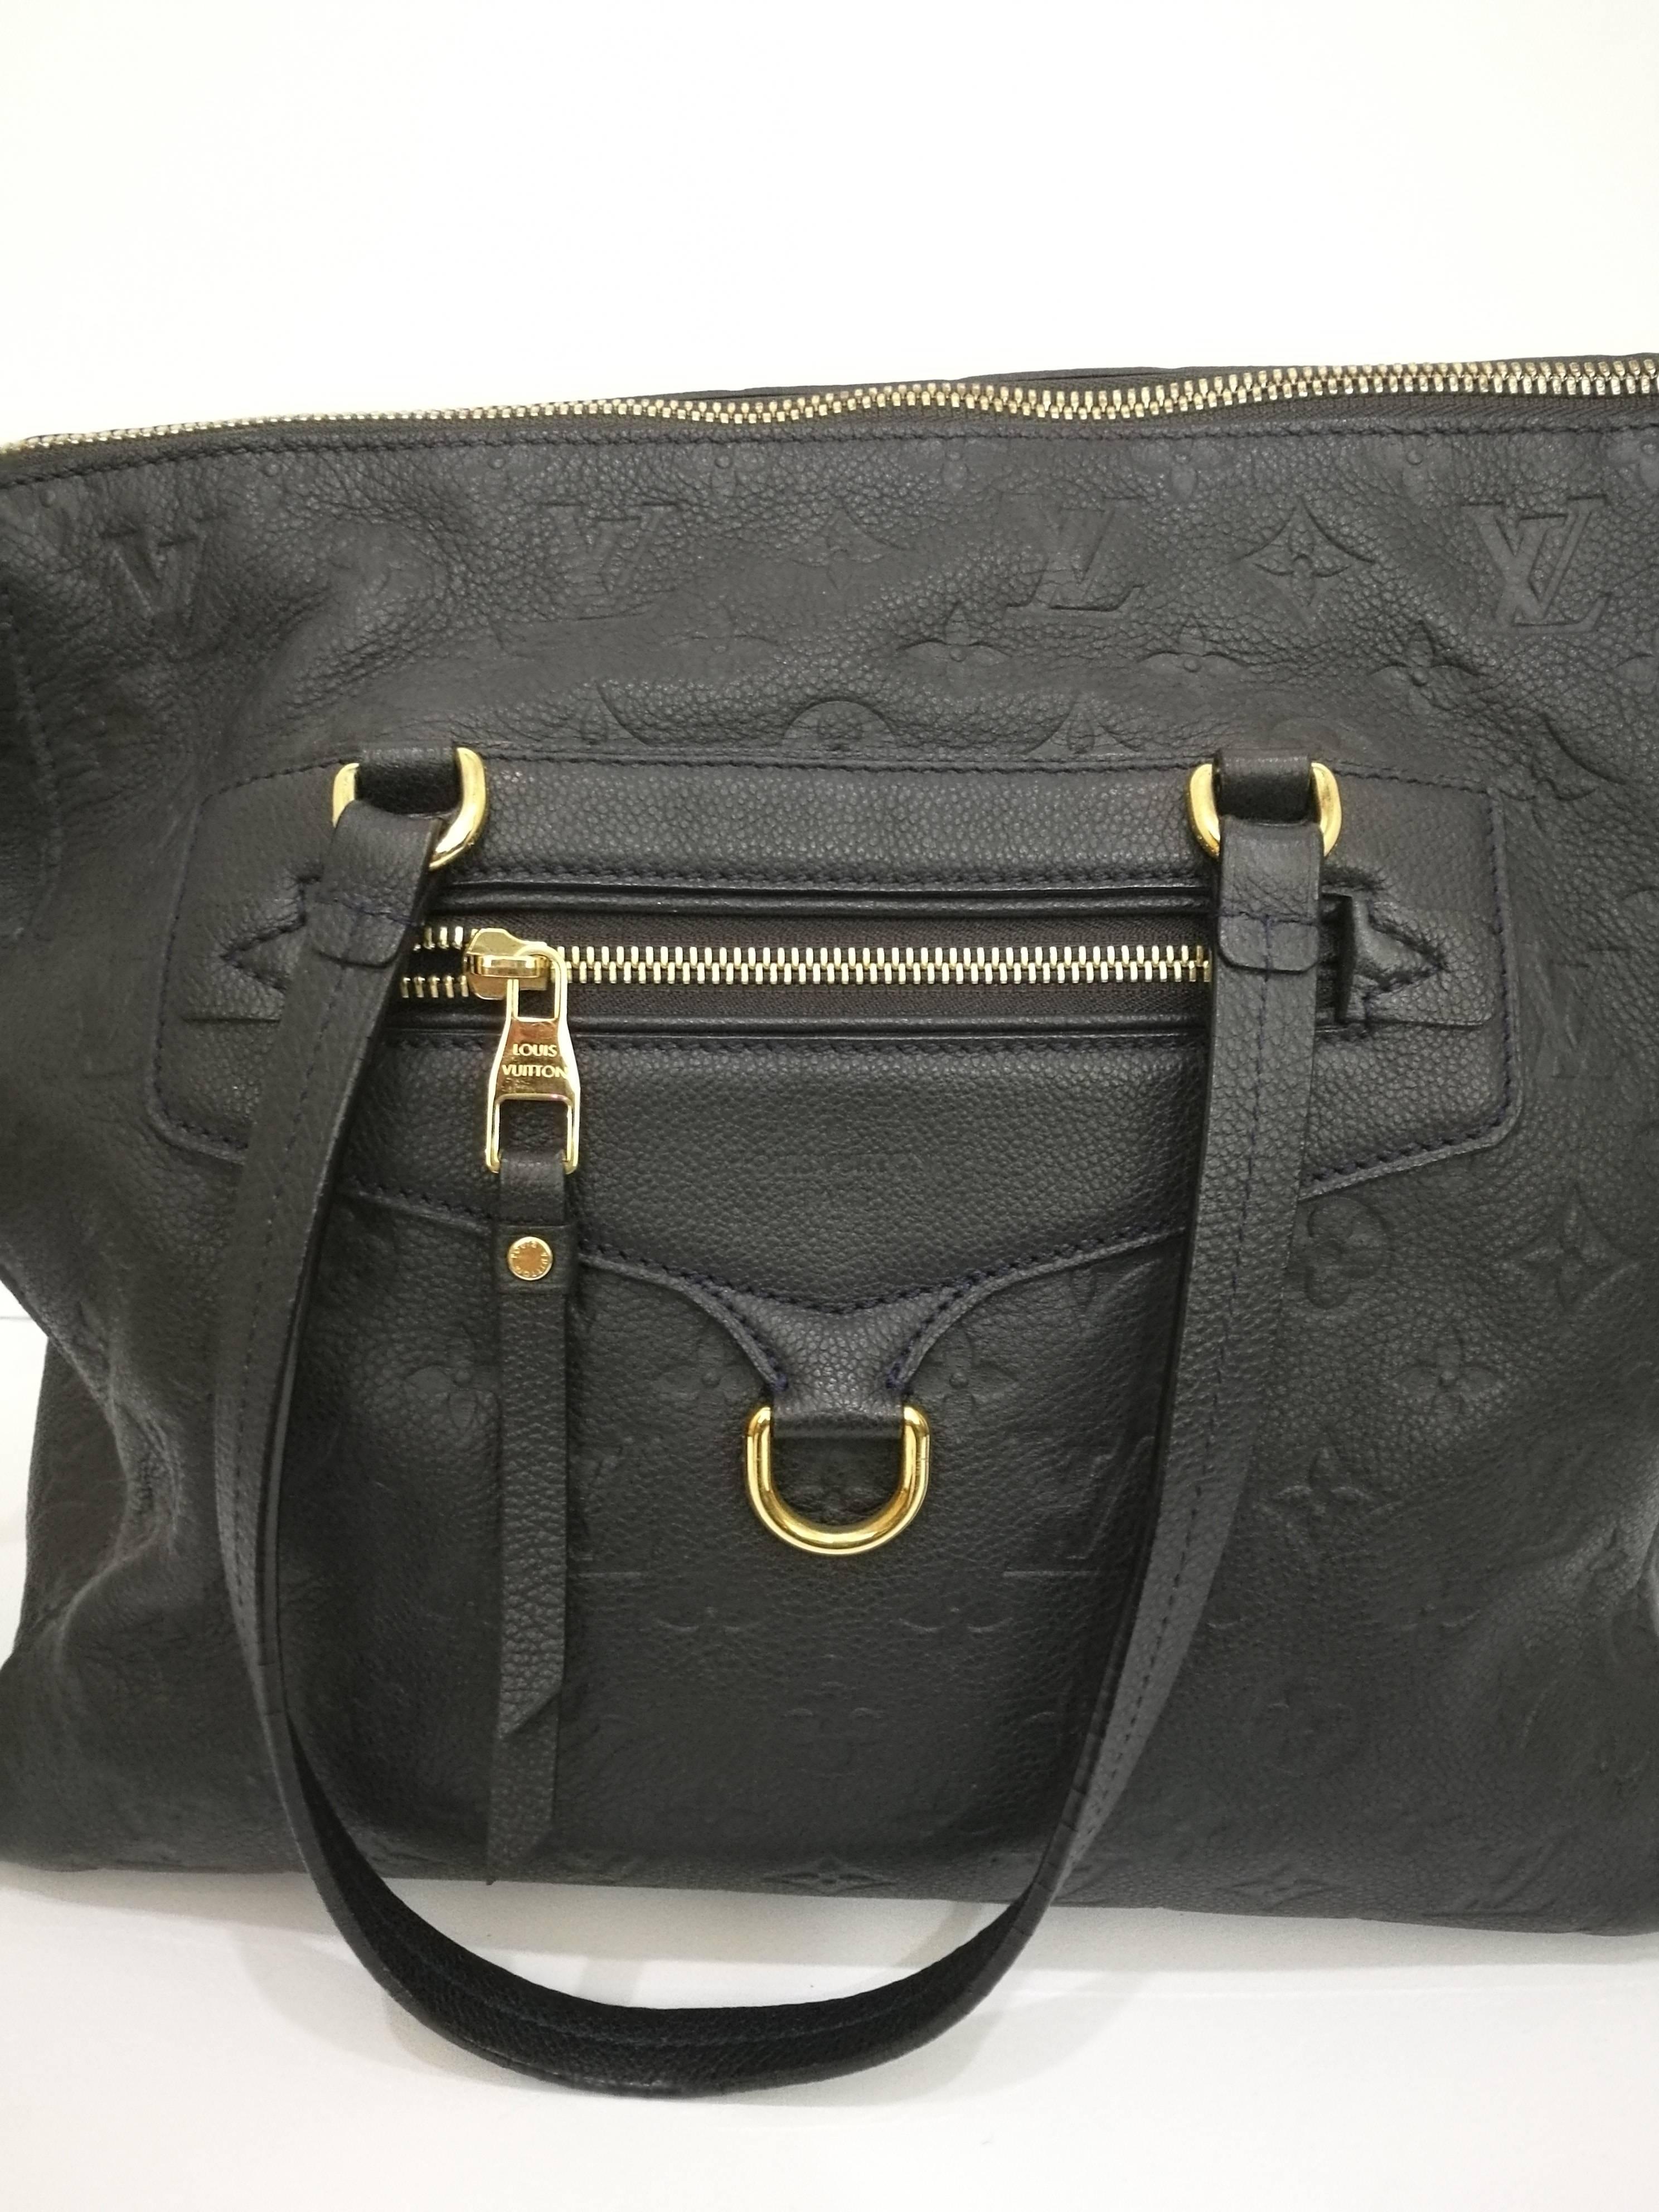 LOUIS VUITTON Monogram Empreinte Lumineuse GM 
This stylish tote is crafted of Louis Vuitton monogram embossed leather and features tall leather strap top handles  a frontal zipper pocket and extensive shiny brass hardware. The top zipper opens to